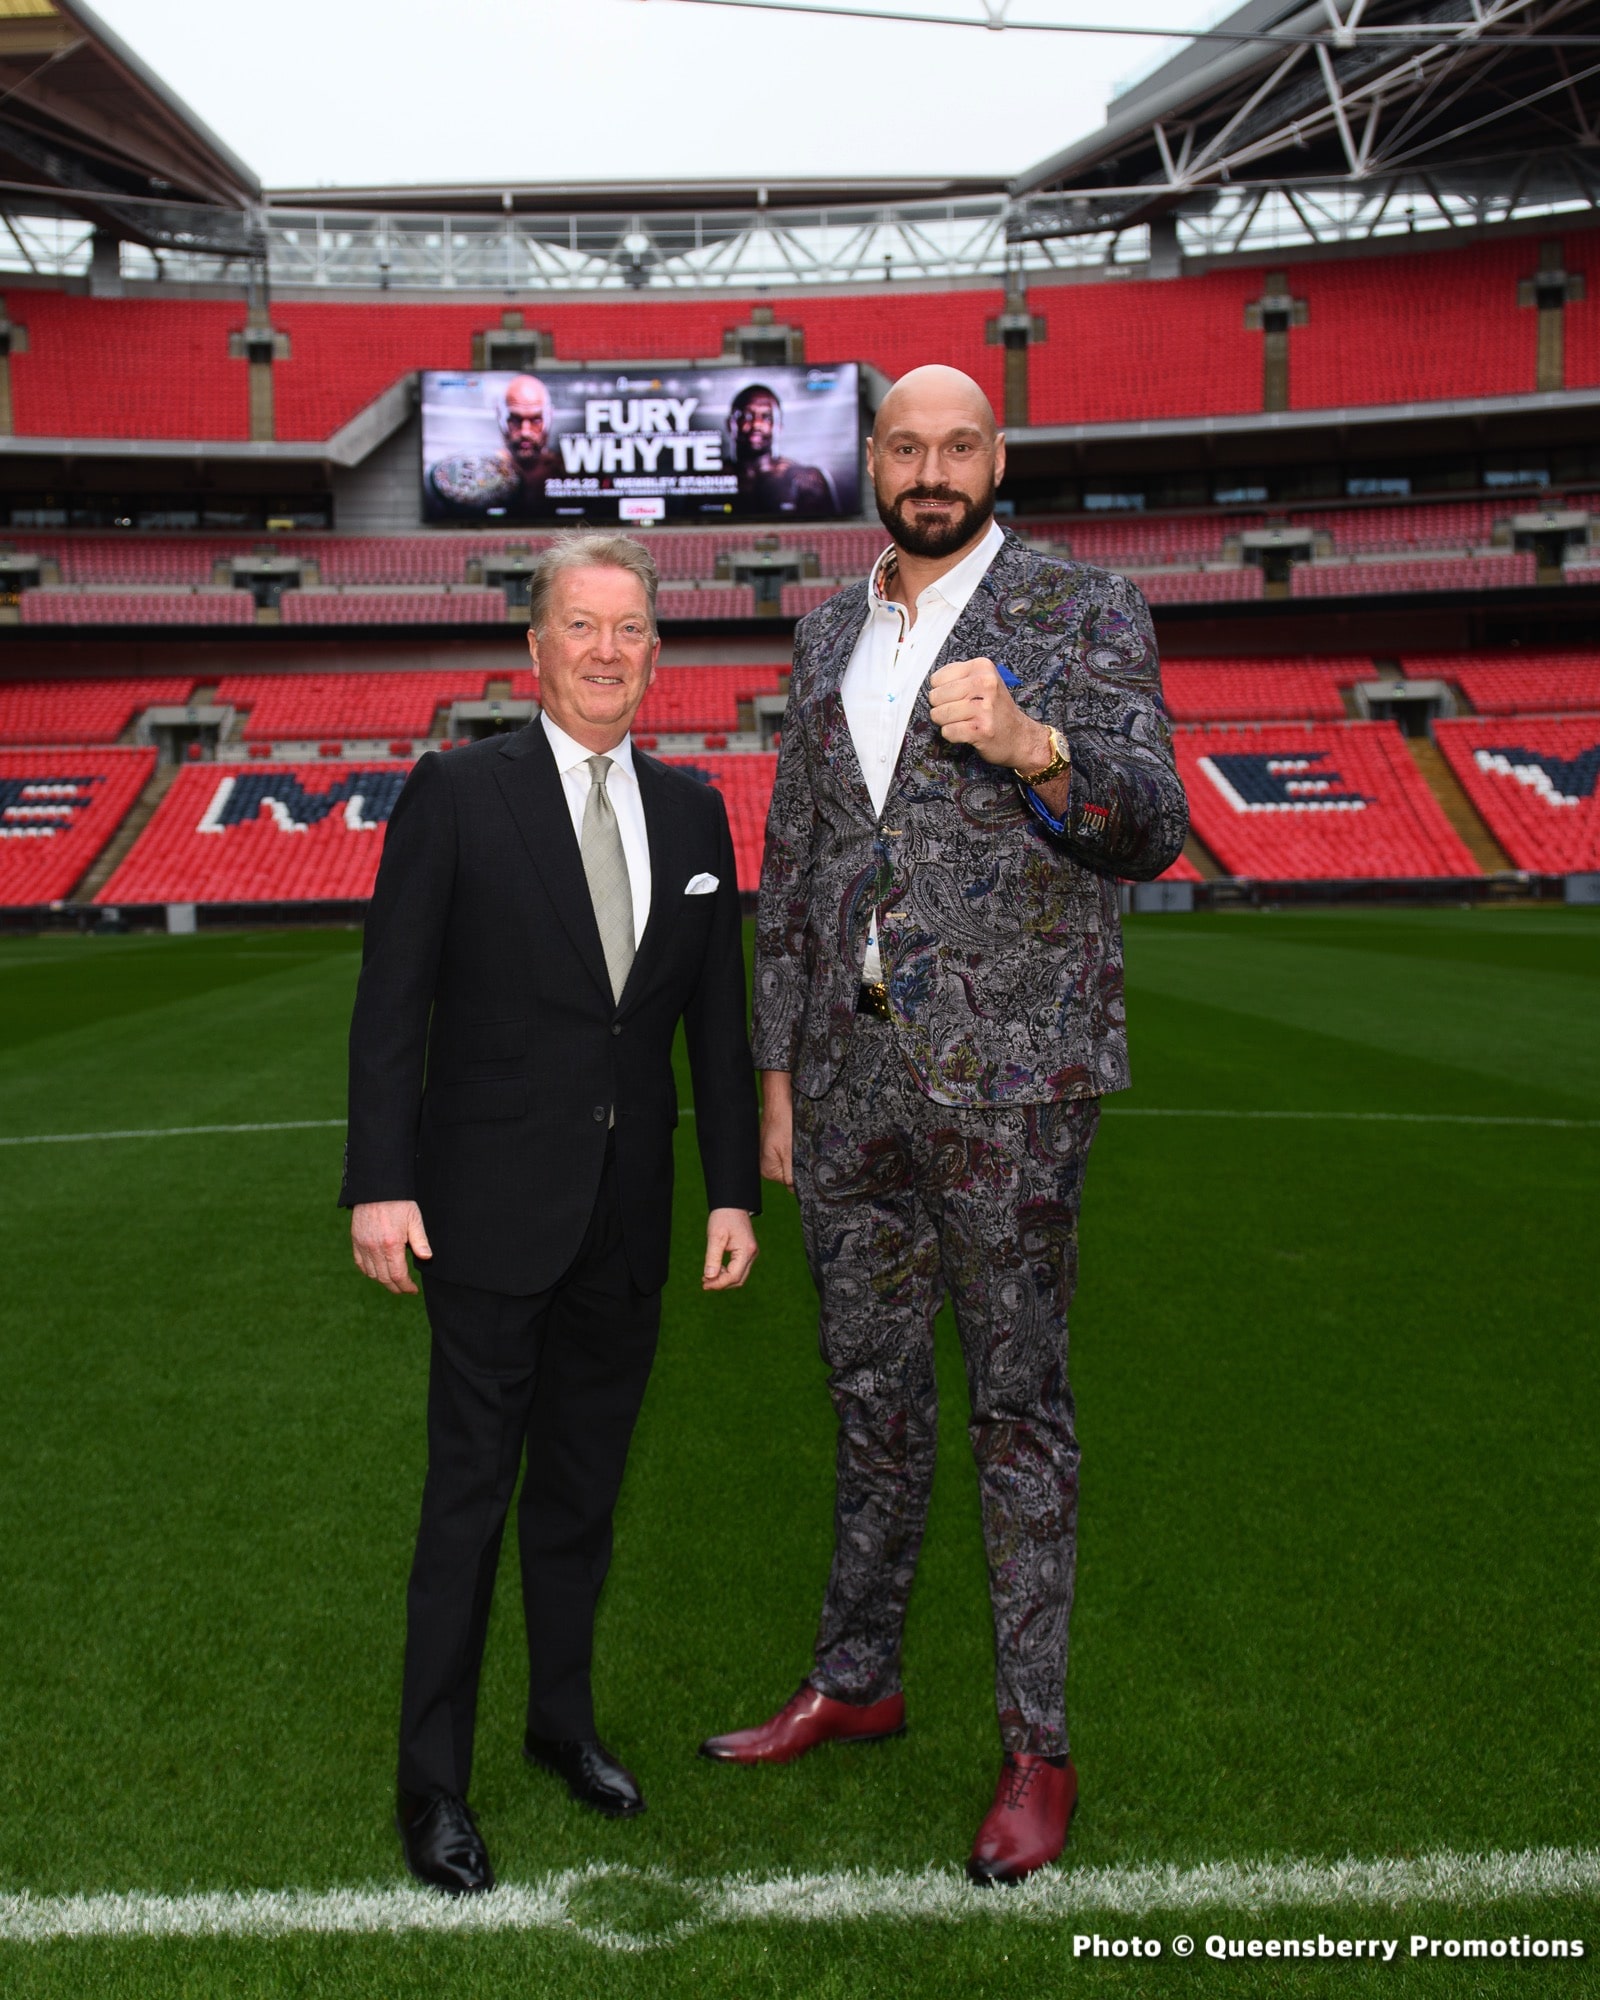 Image: Tyson Fury gives Joshua "Take it or leave it" offer for November